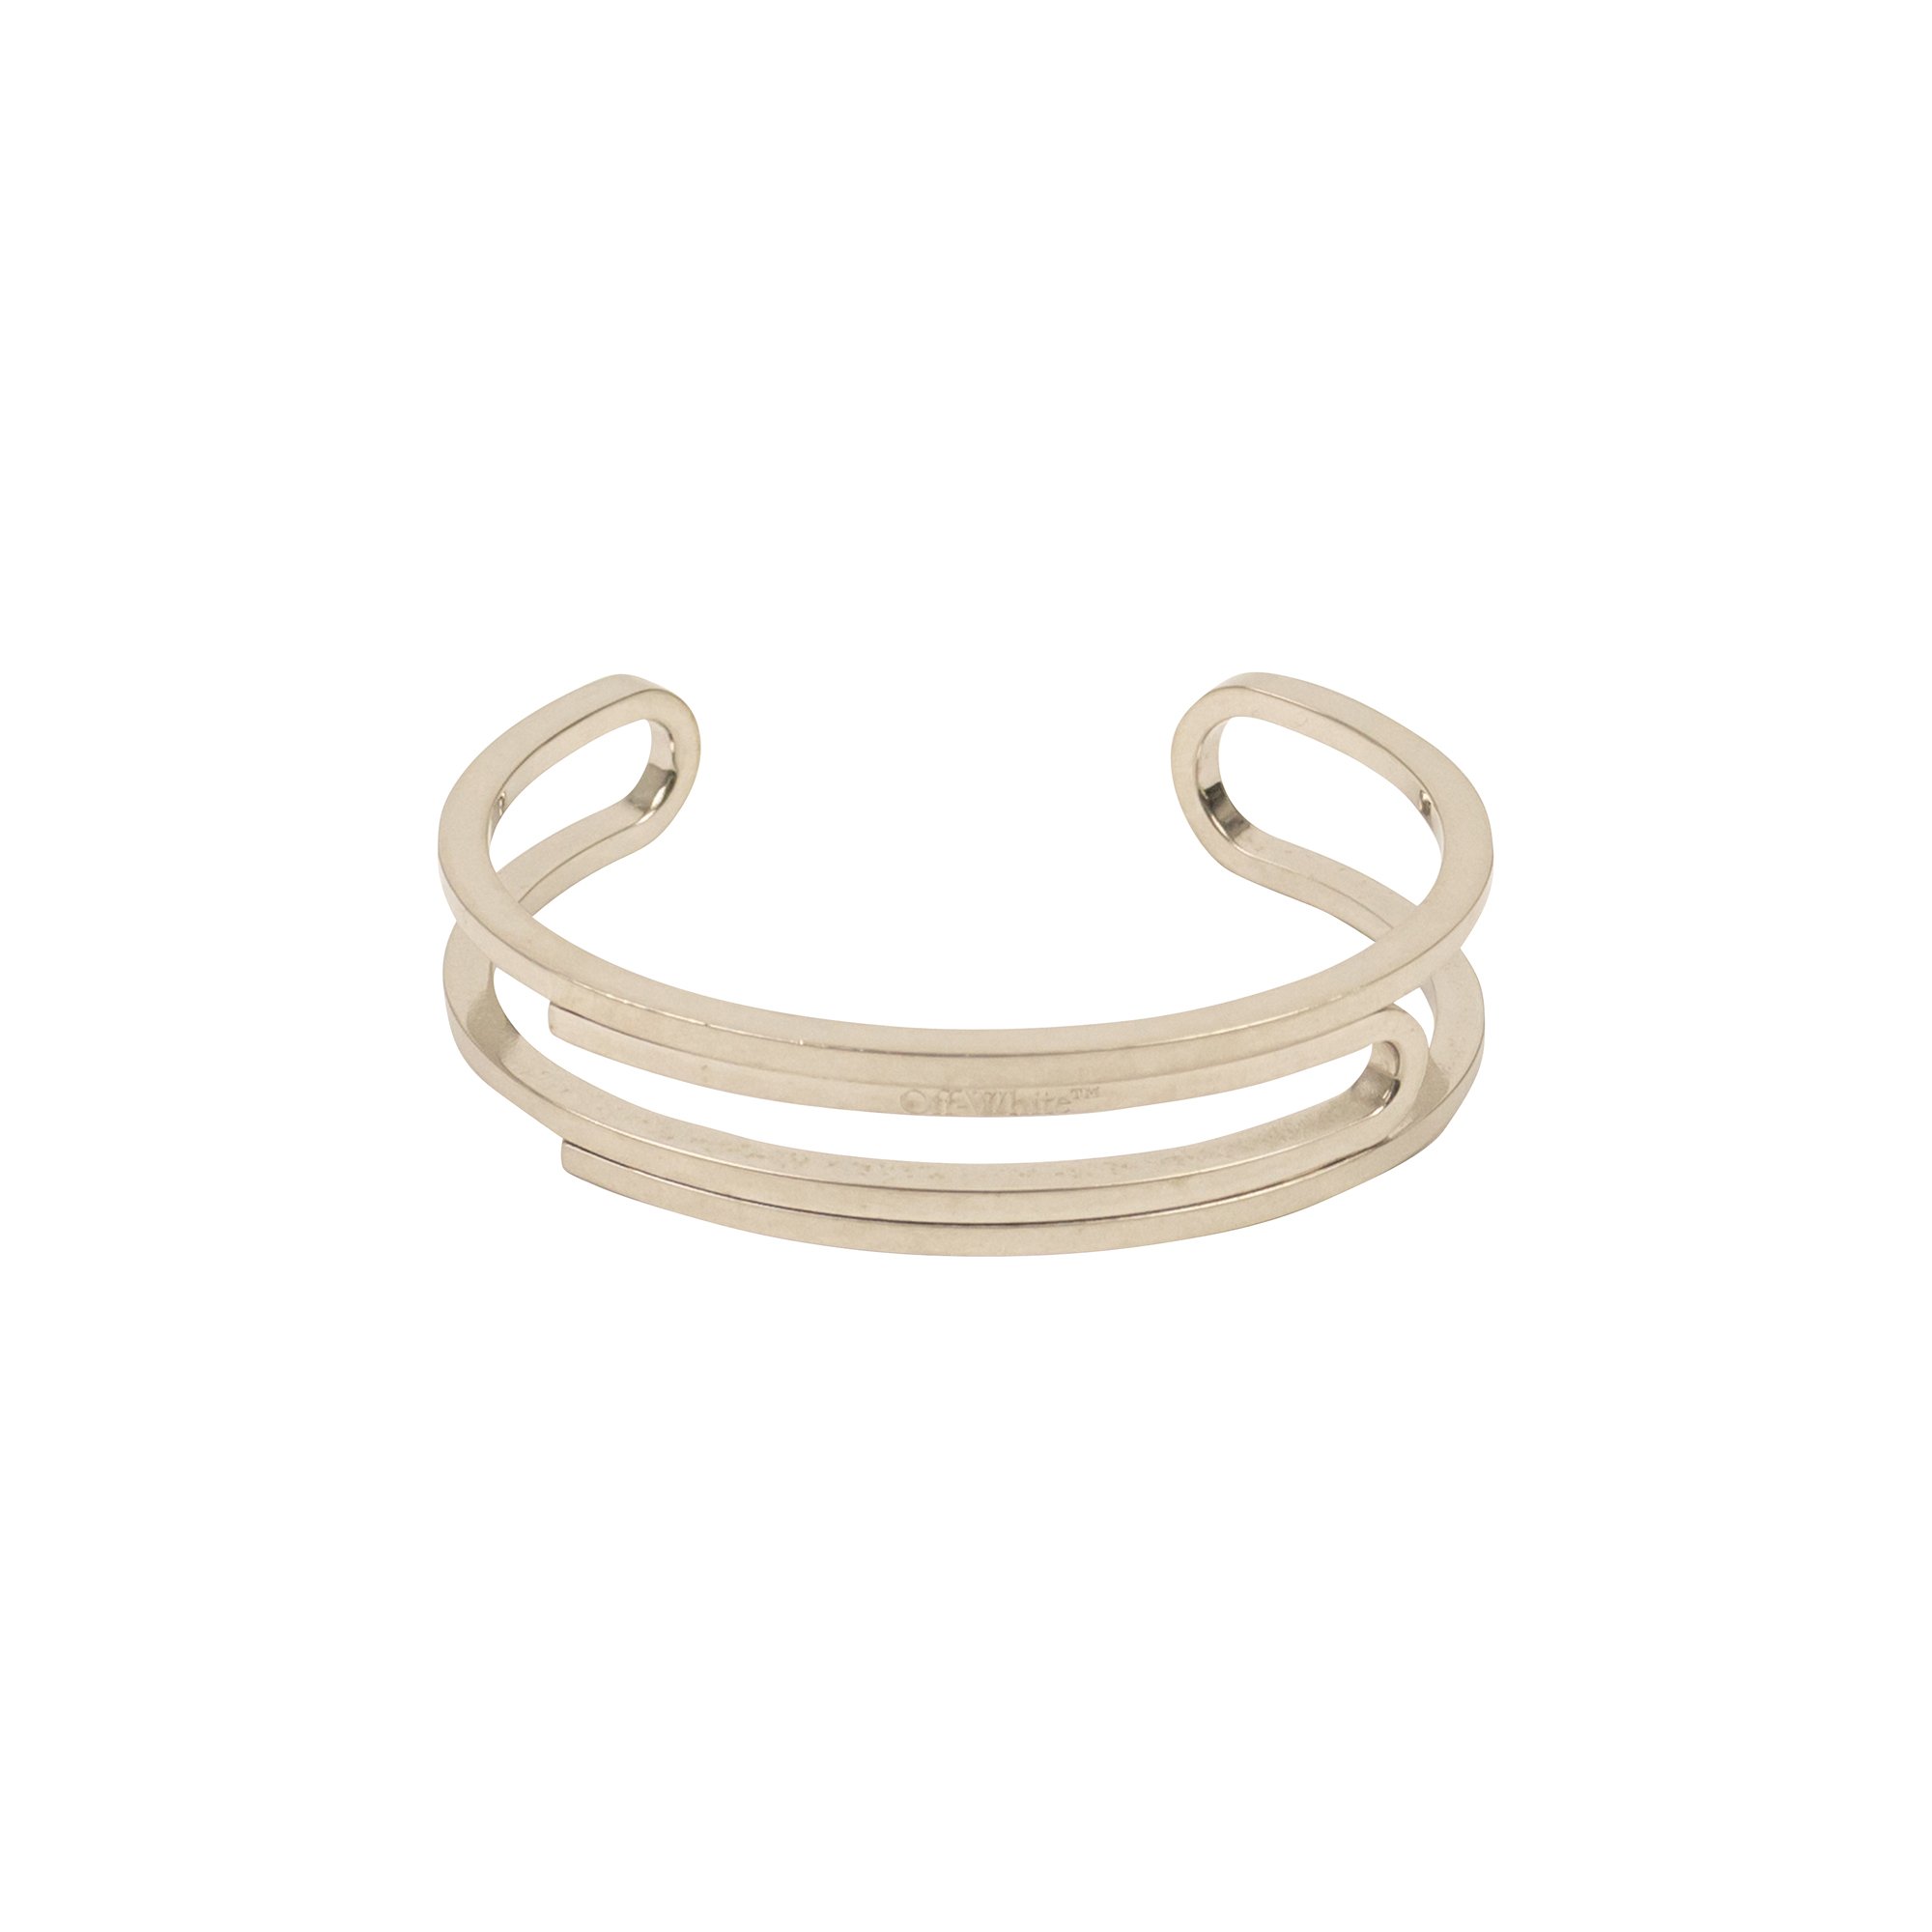 Off-White Paperclip Cuff Bracelet 'Silver'